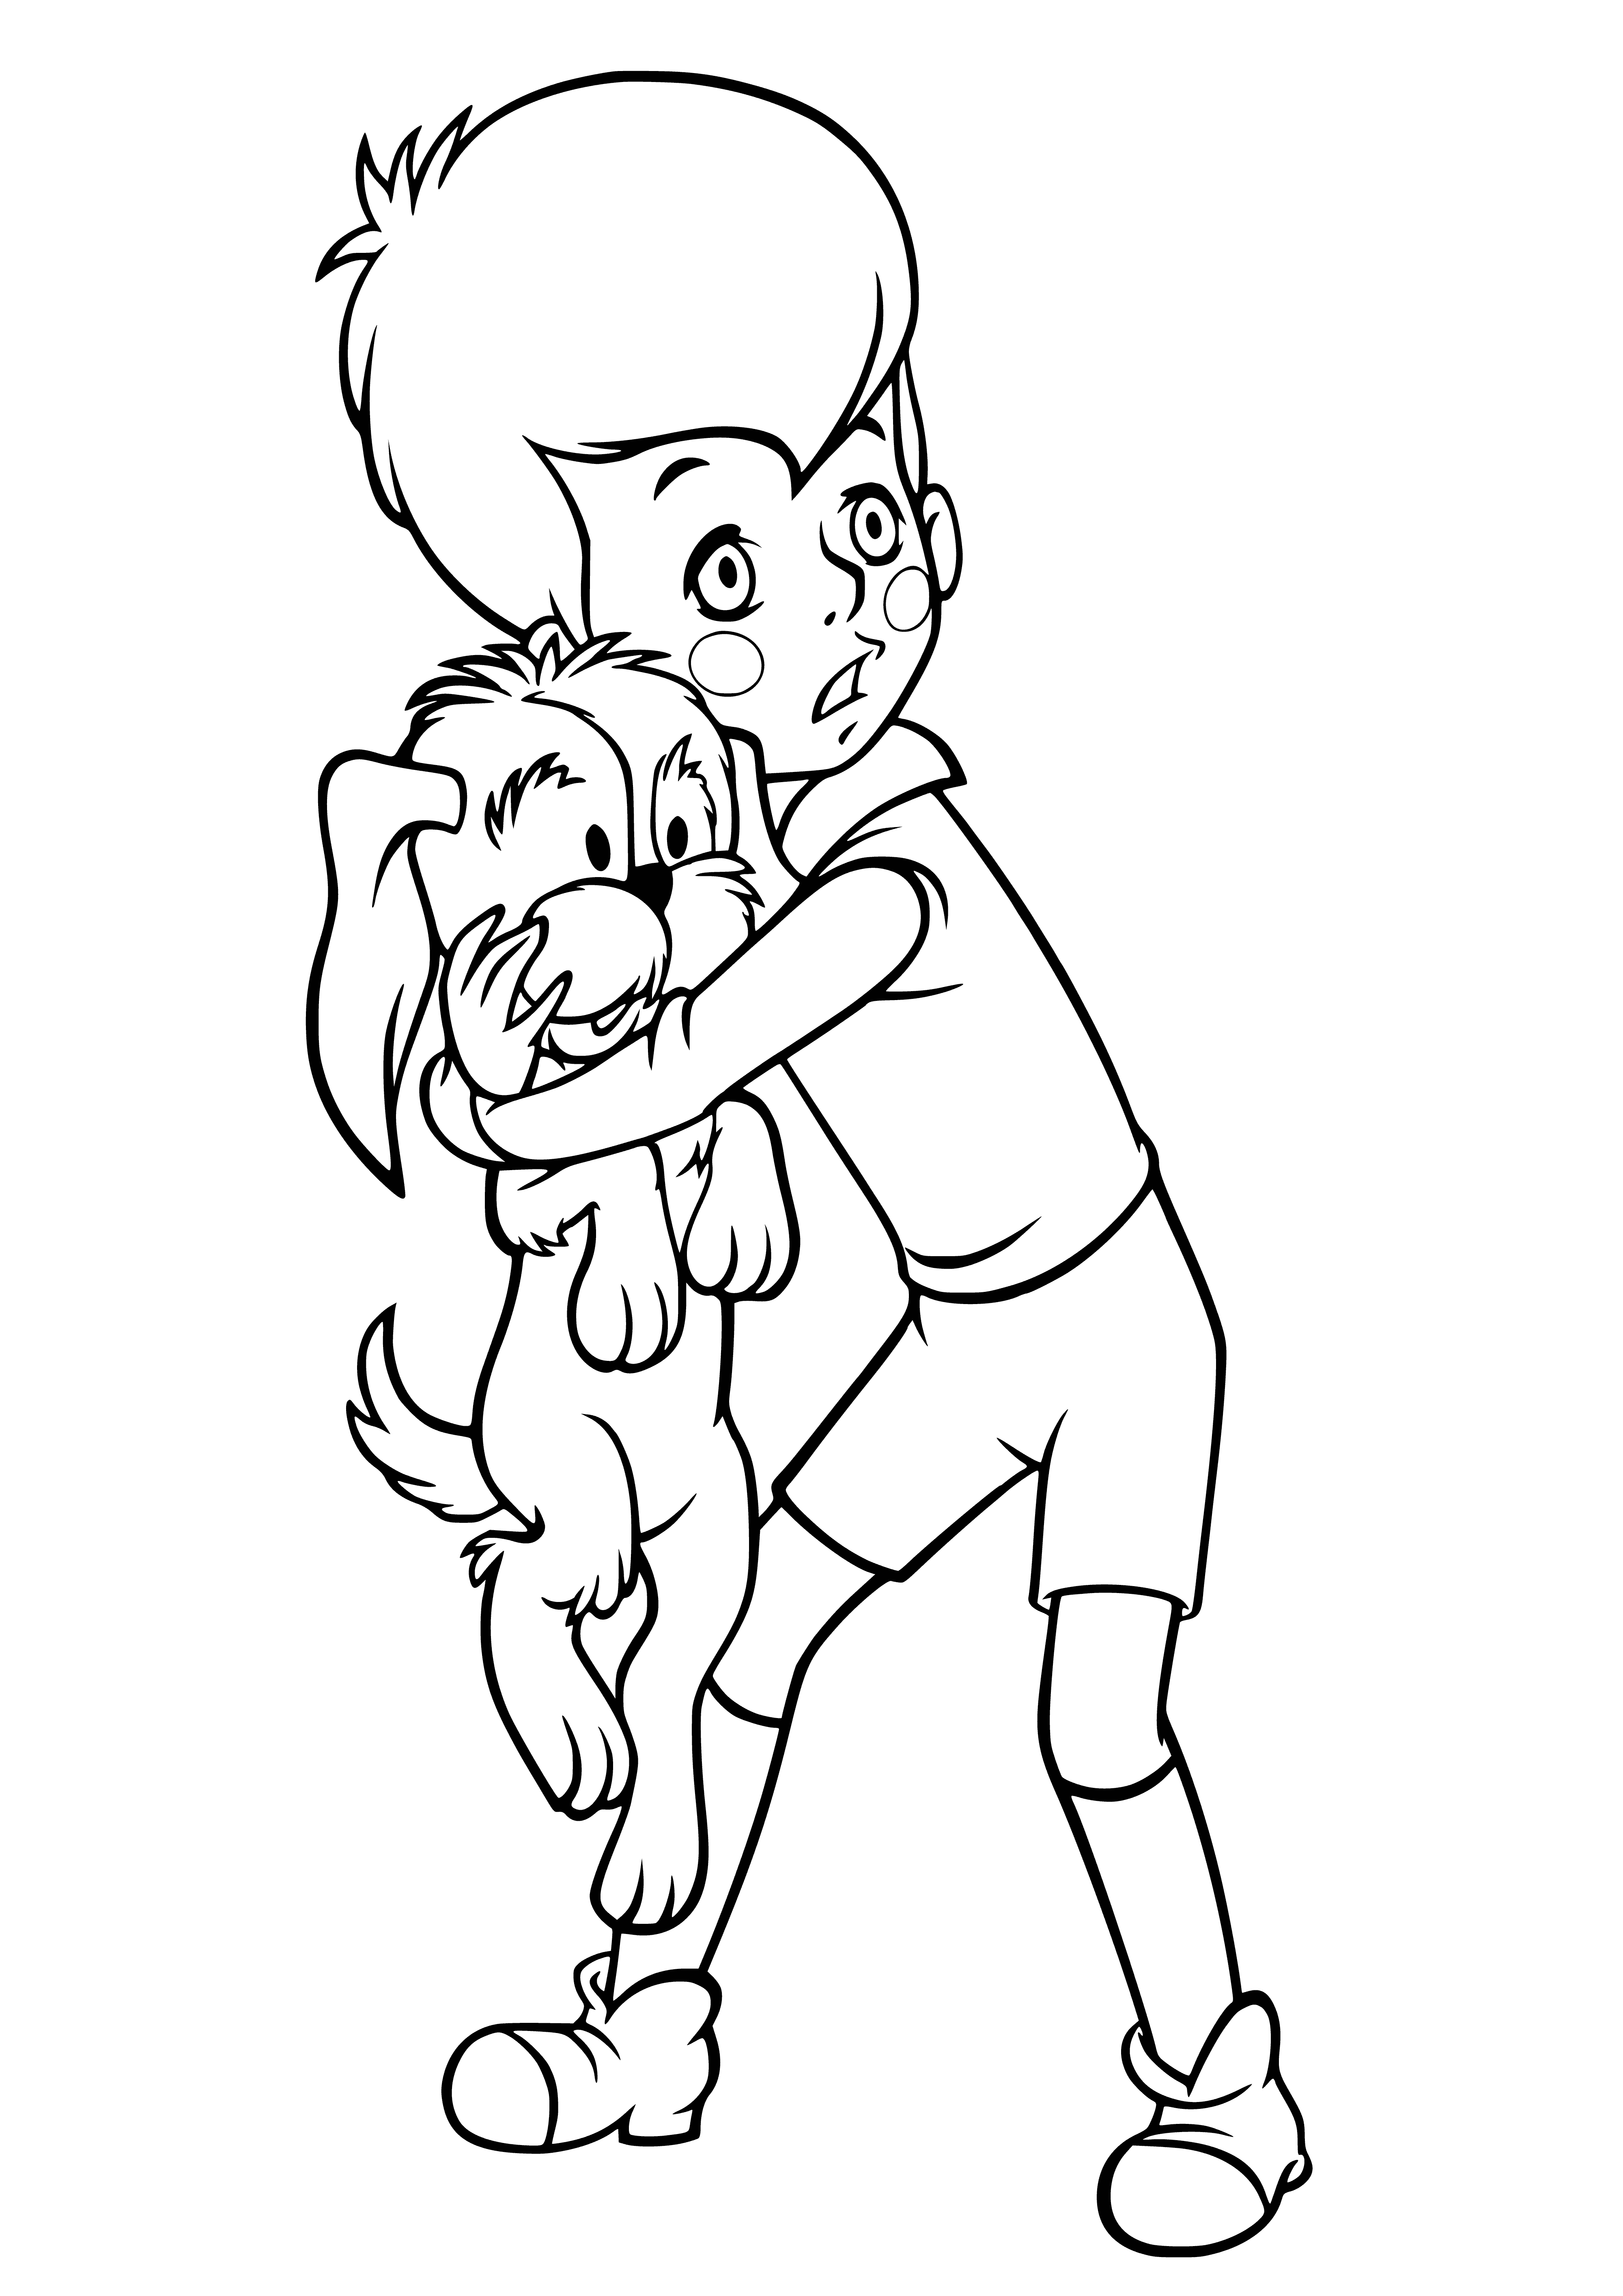 coloring page: Boy happily plays with puppy, who licks his face and smiles.